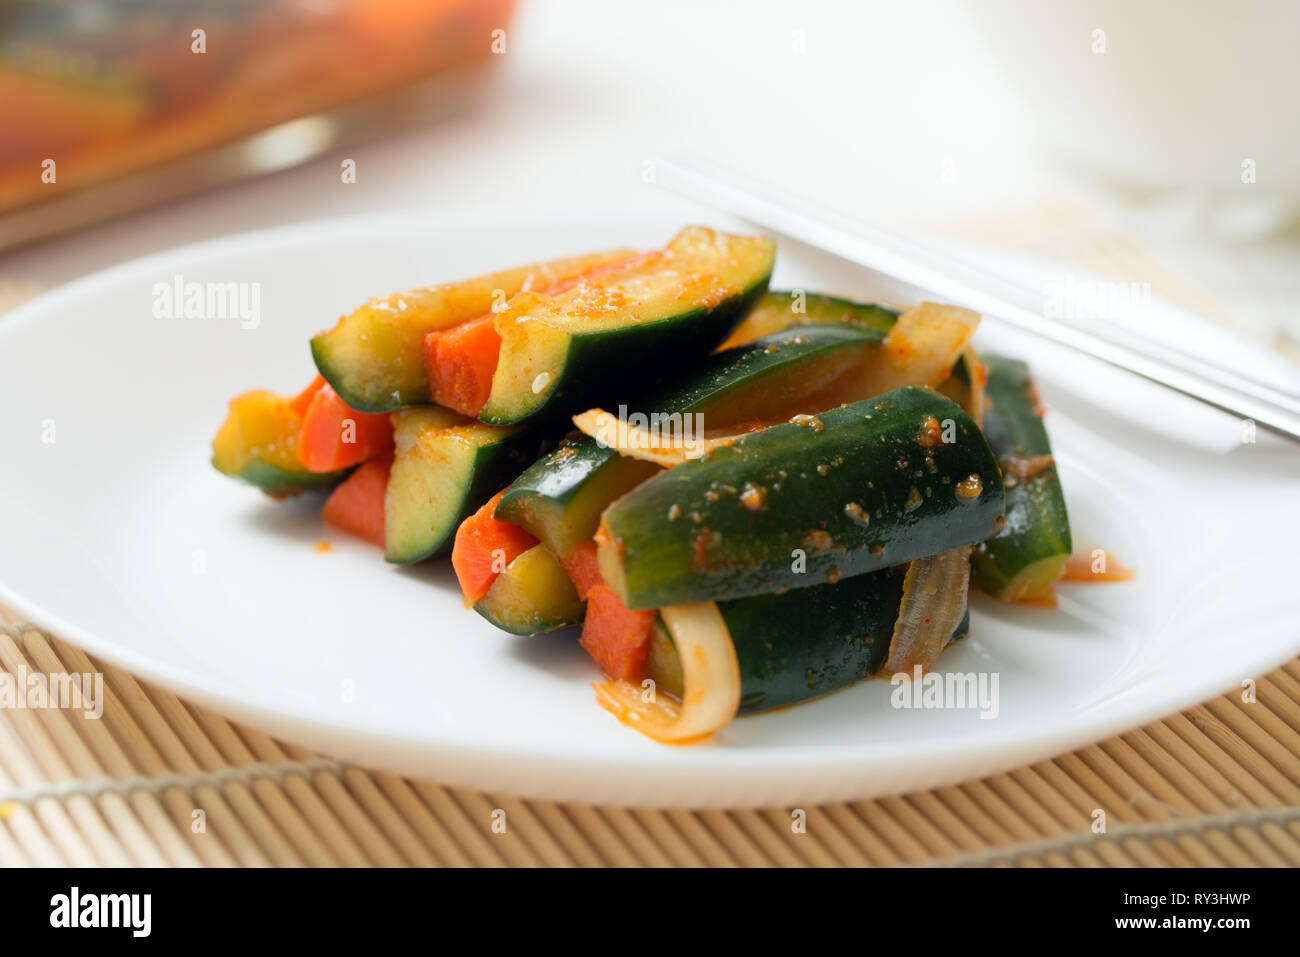 Korea style kimchi pickled cucumbers with carrots salad Stock Photo